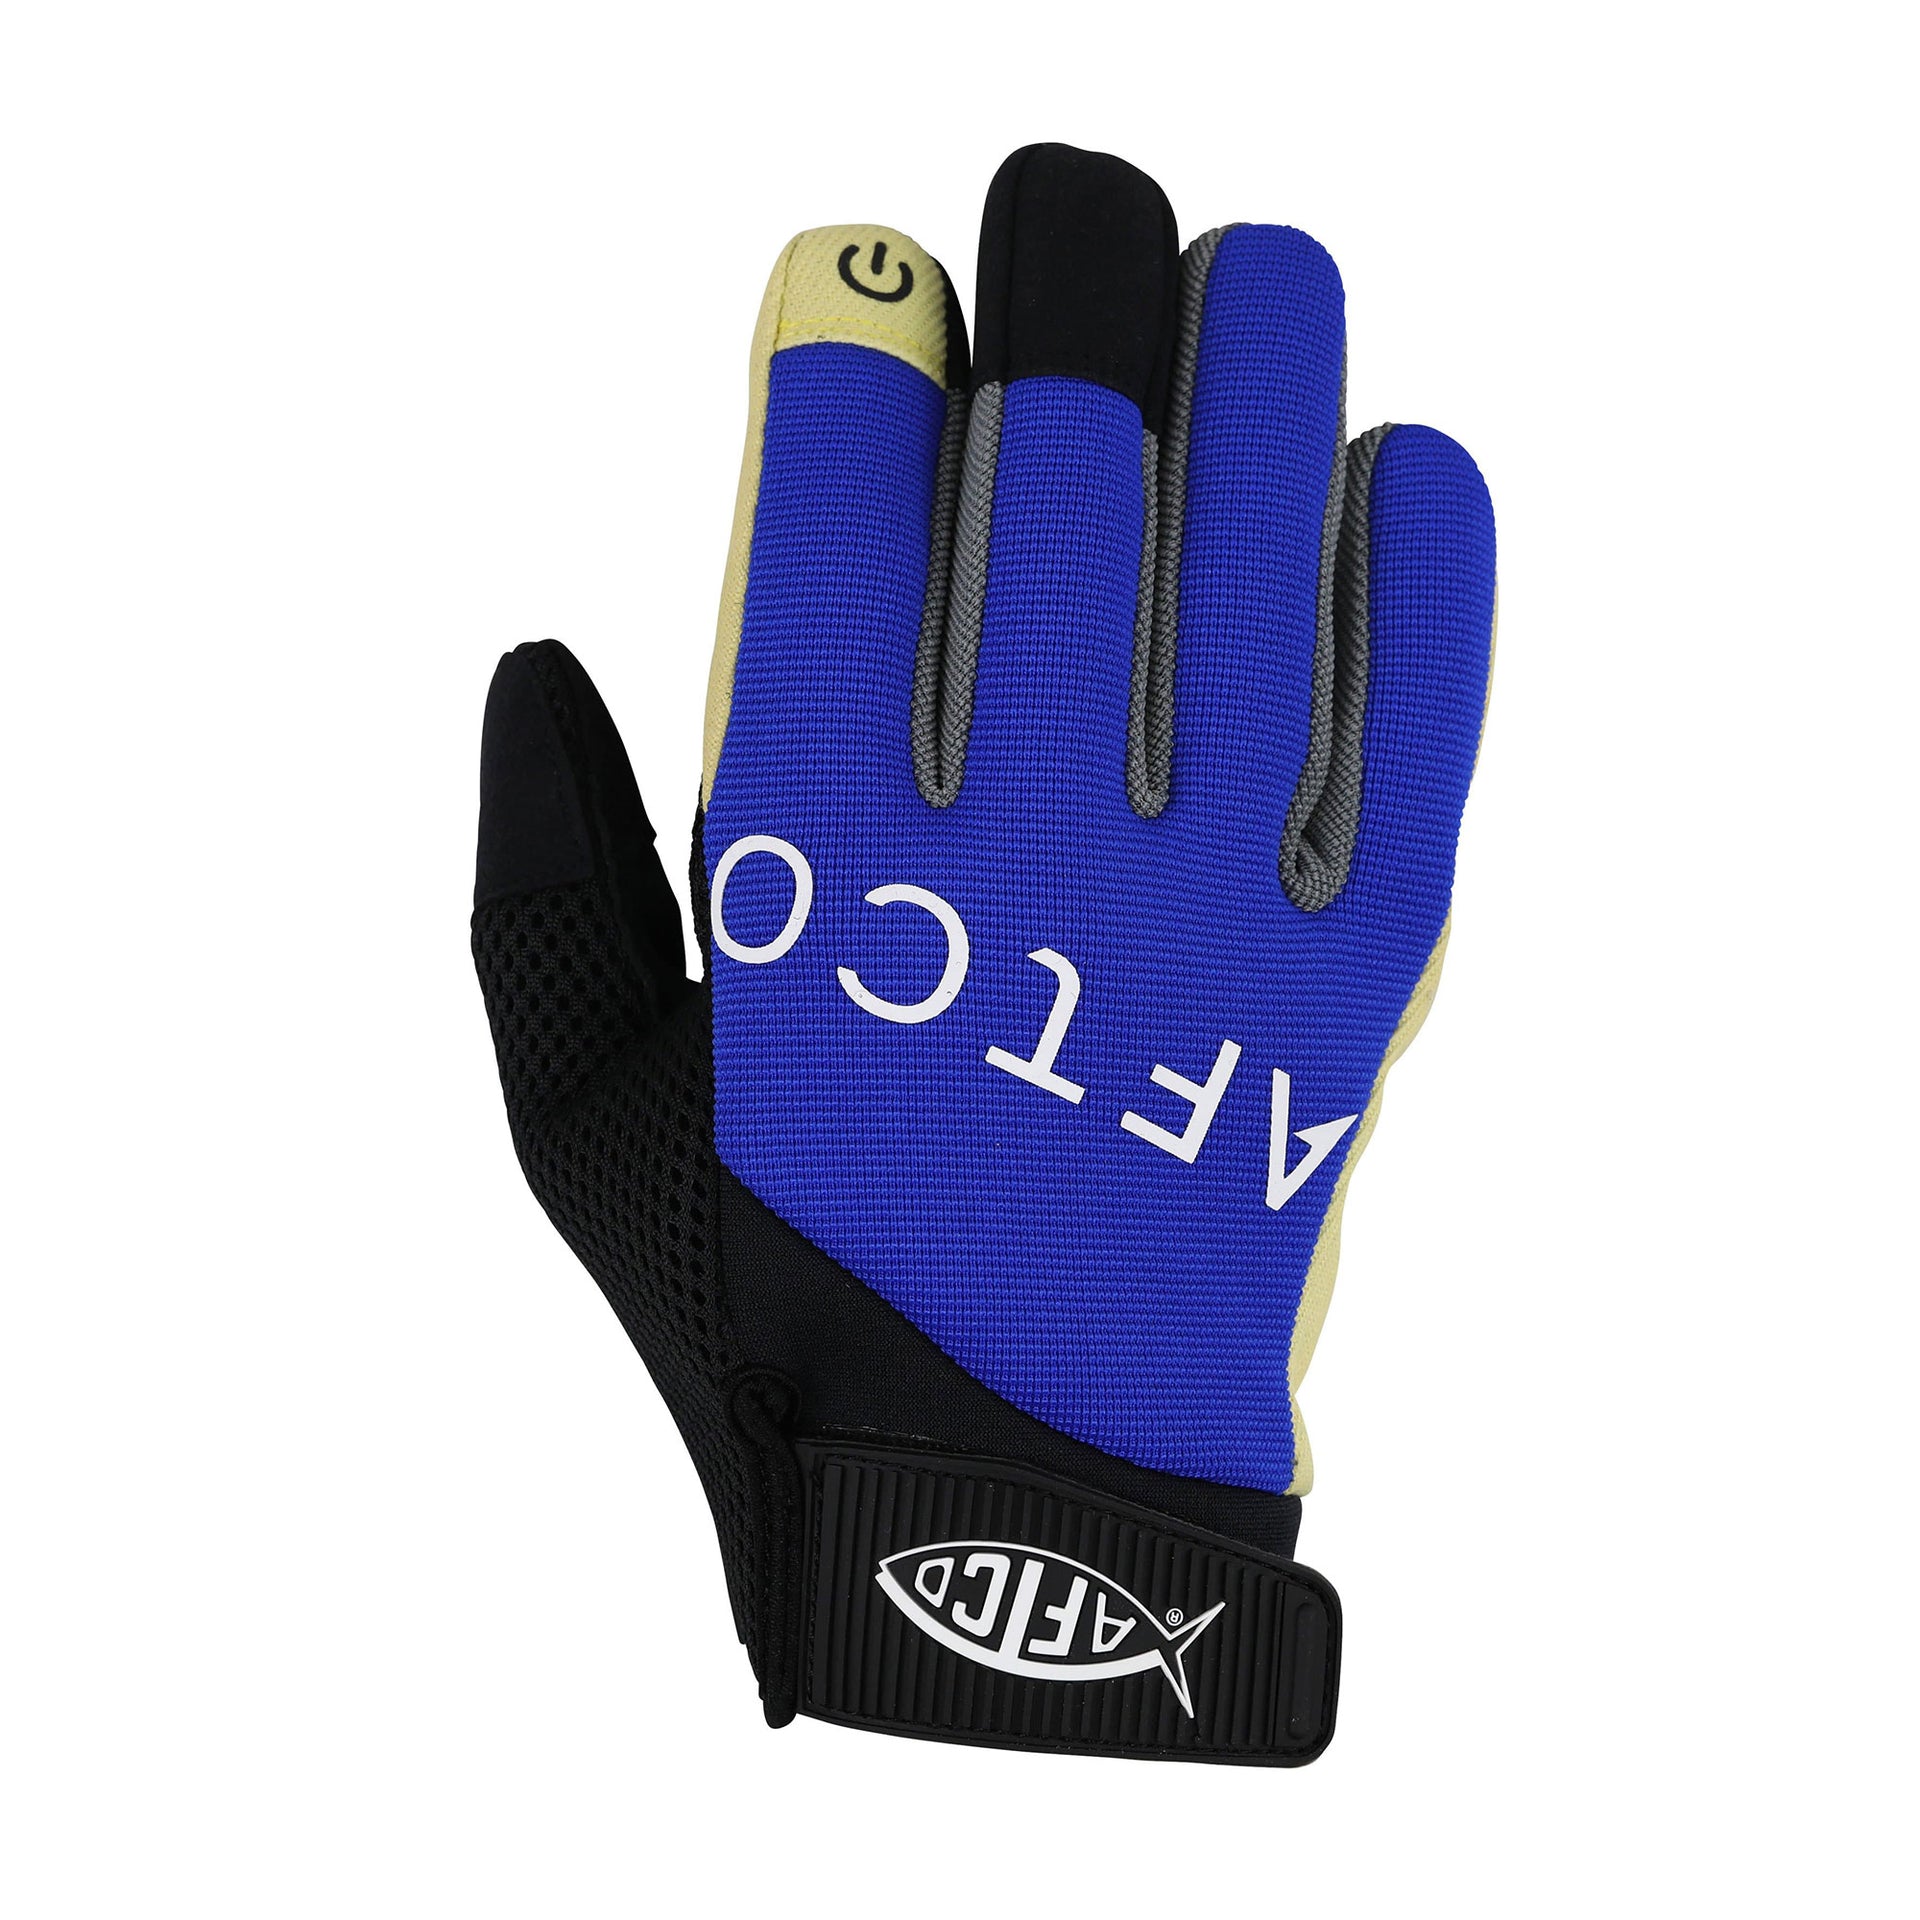 AFTCO Wiremax Fishing Leadering Glove - Pick Your Size - Free Shipping